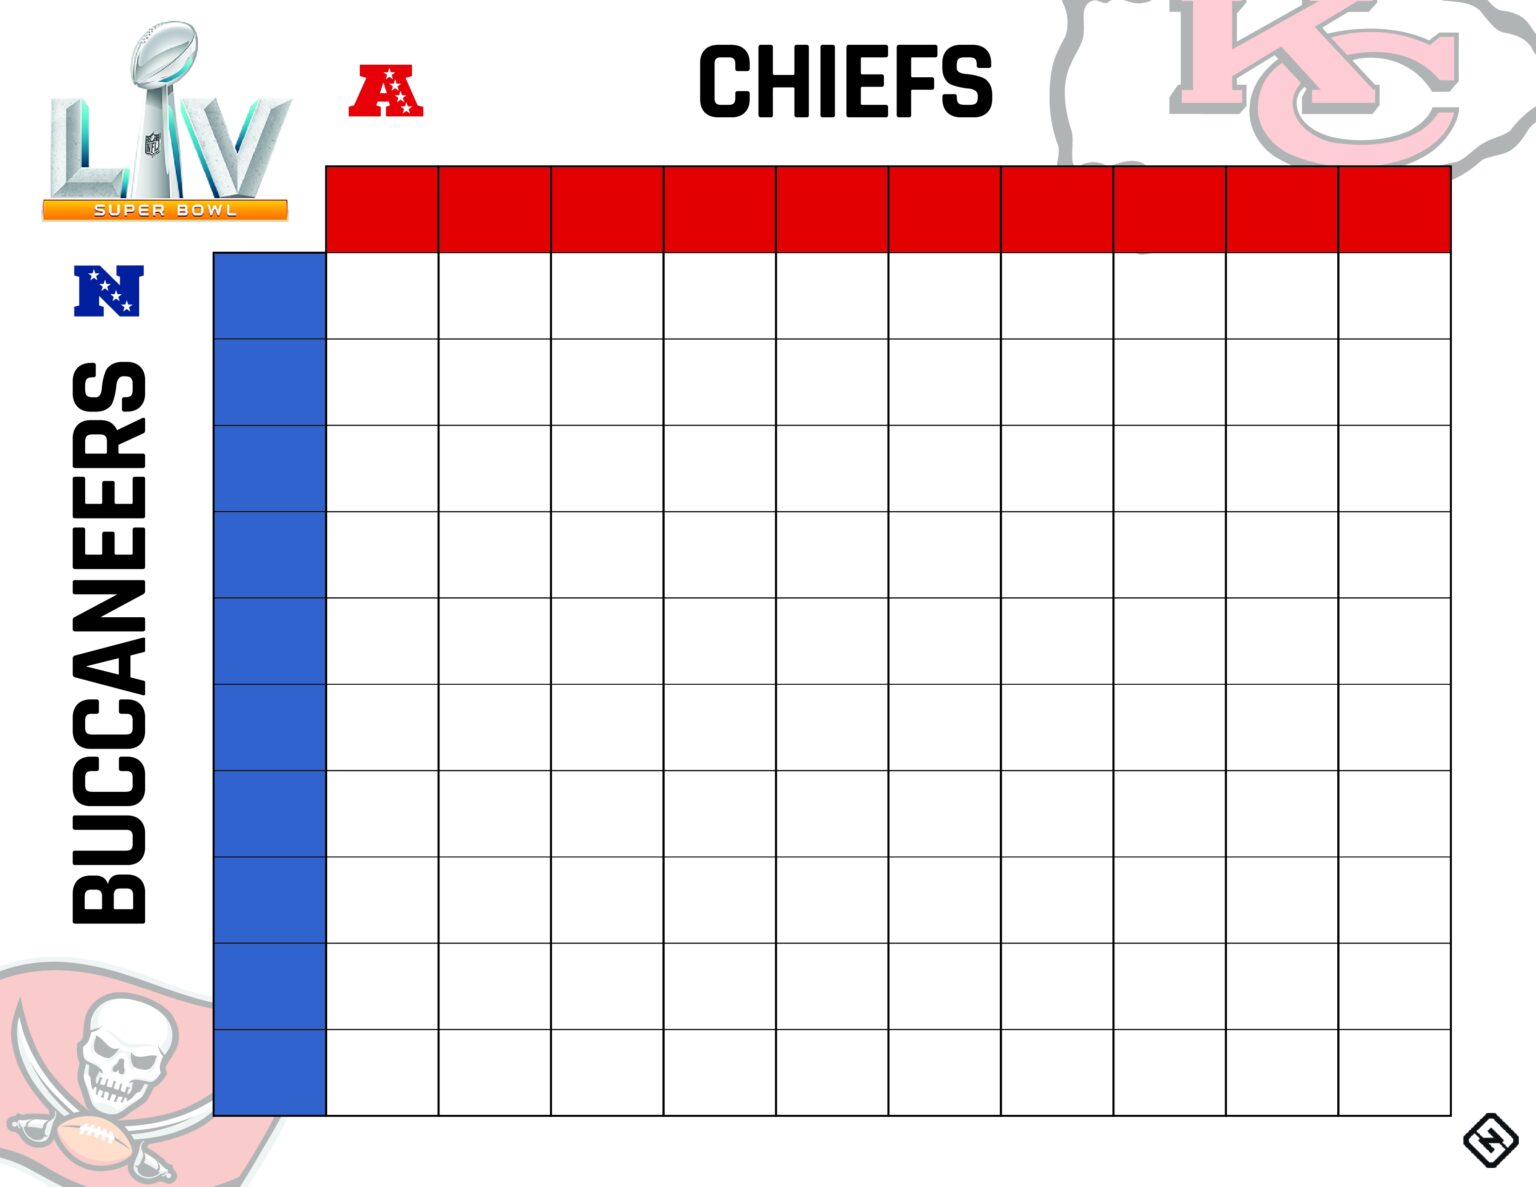 Printable Super Bowl Squares Grid For Chiefs Vs Buccaneers In 2021